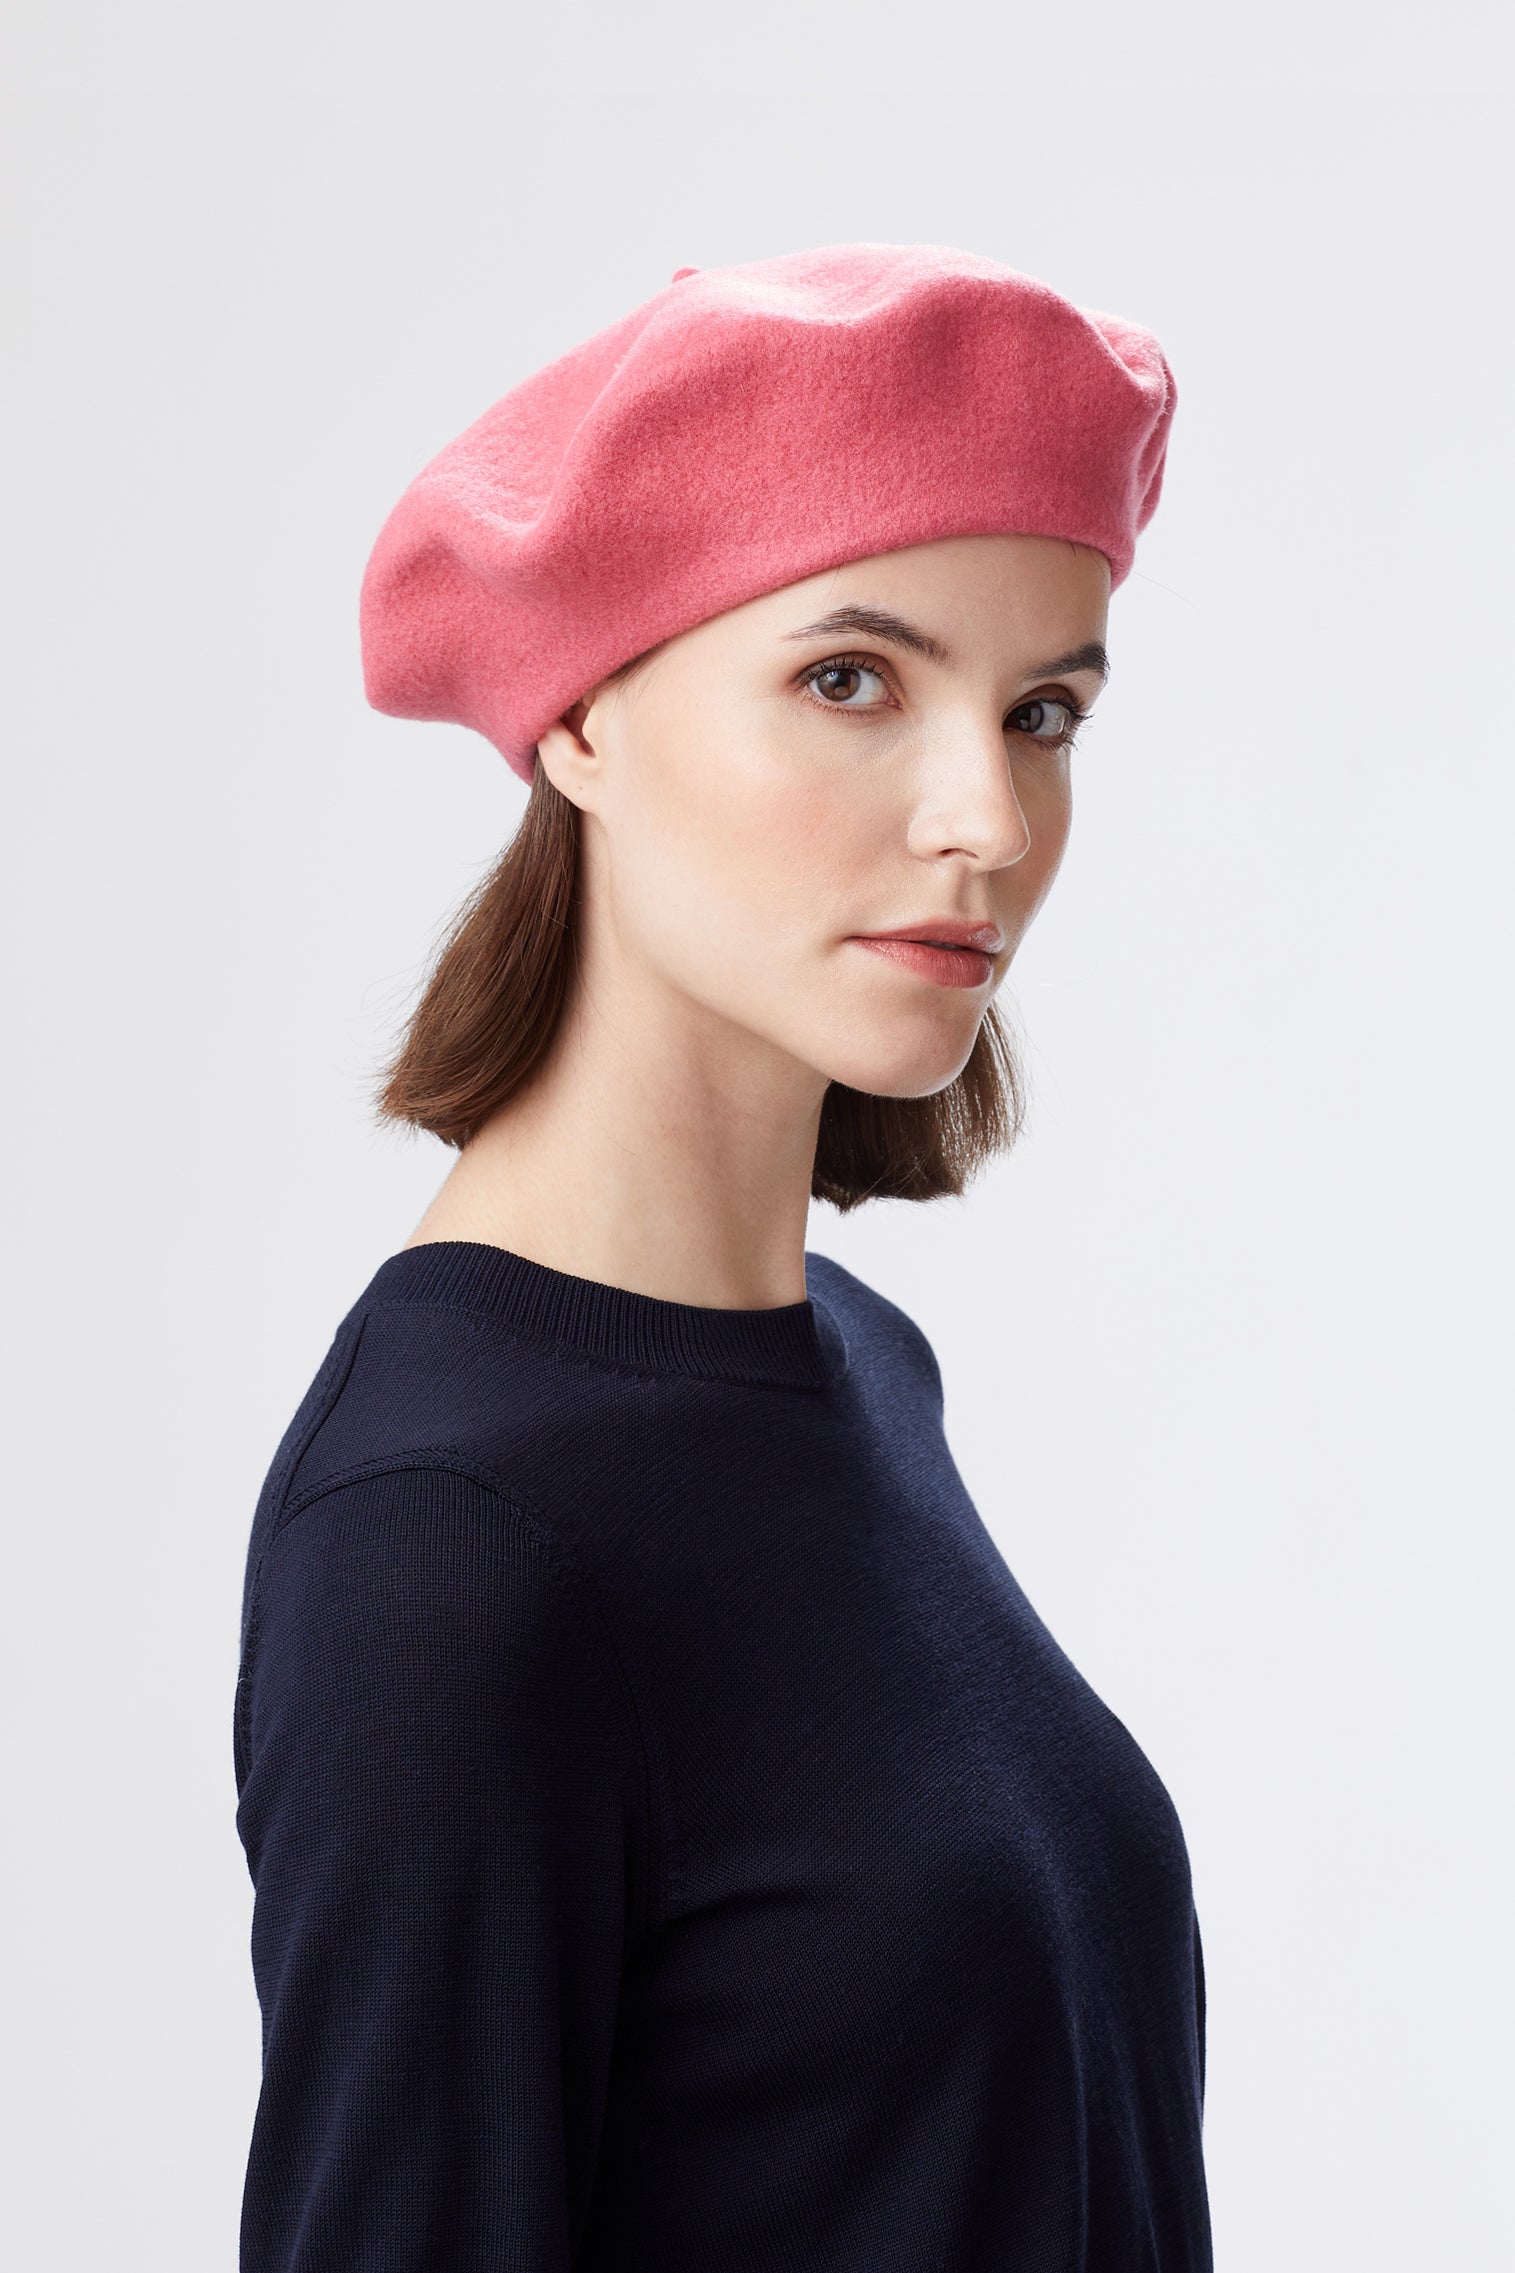 French Beret - Hats for Round Face Shapes - Lock & Co. Hatters London UK